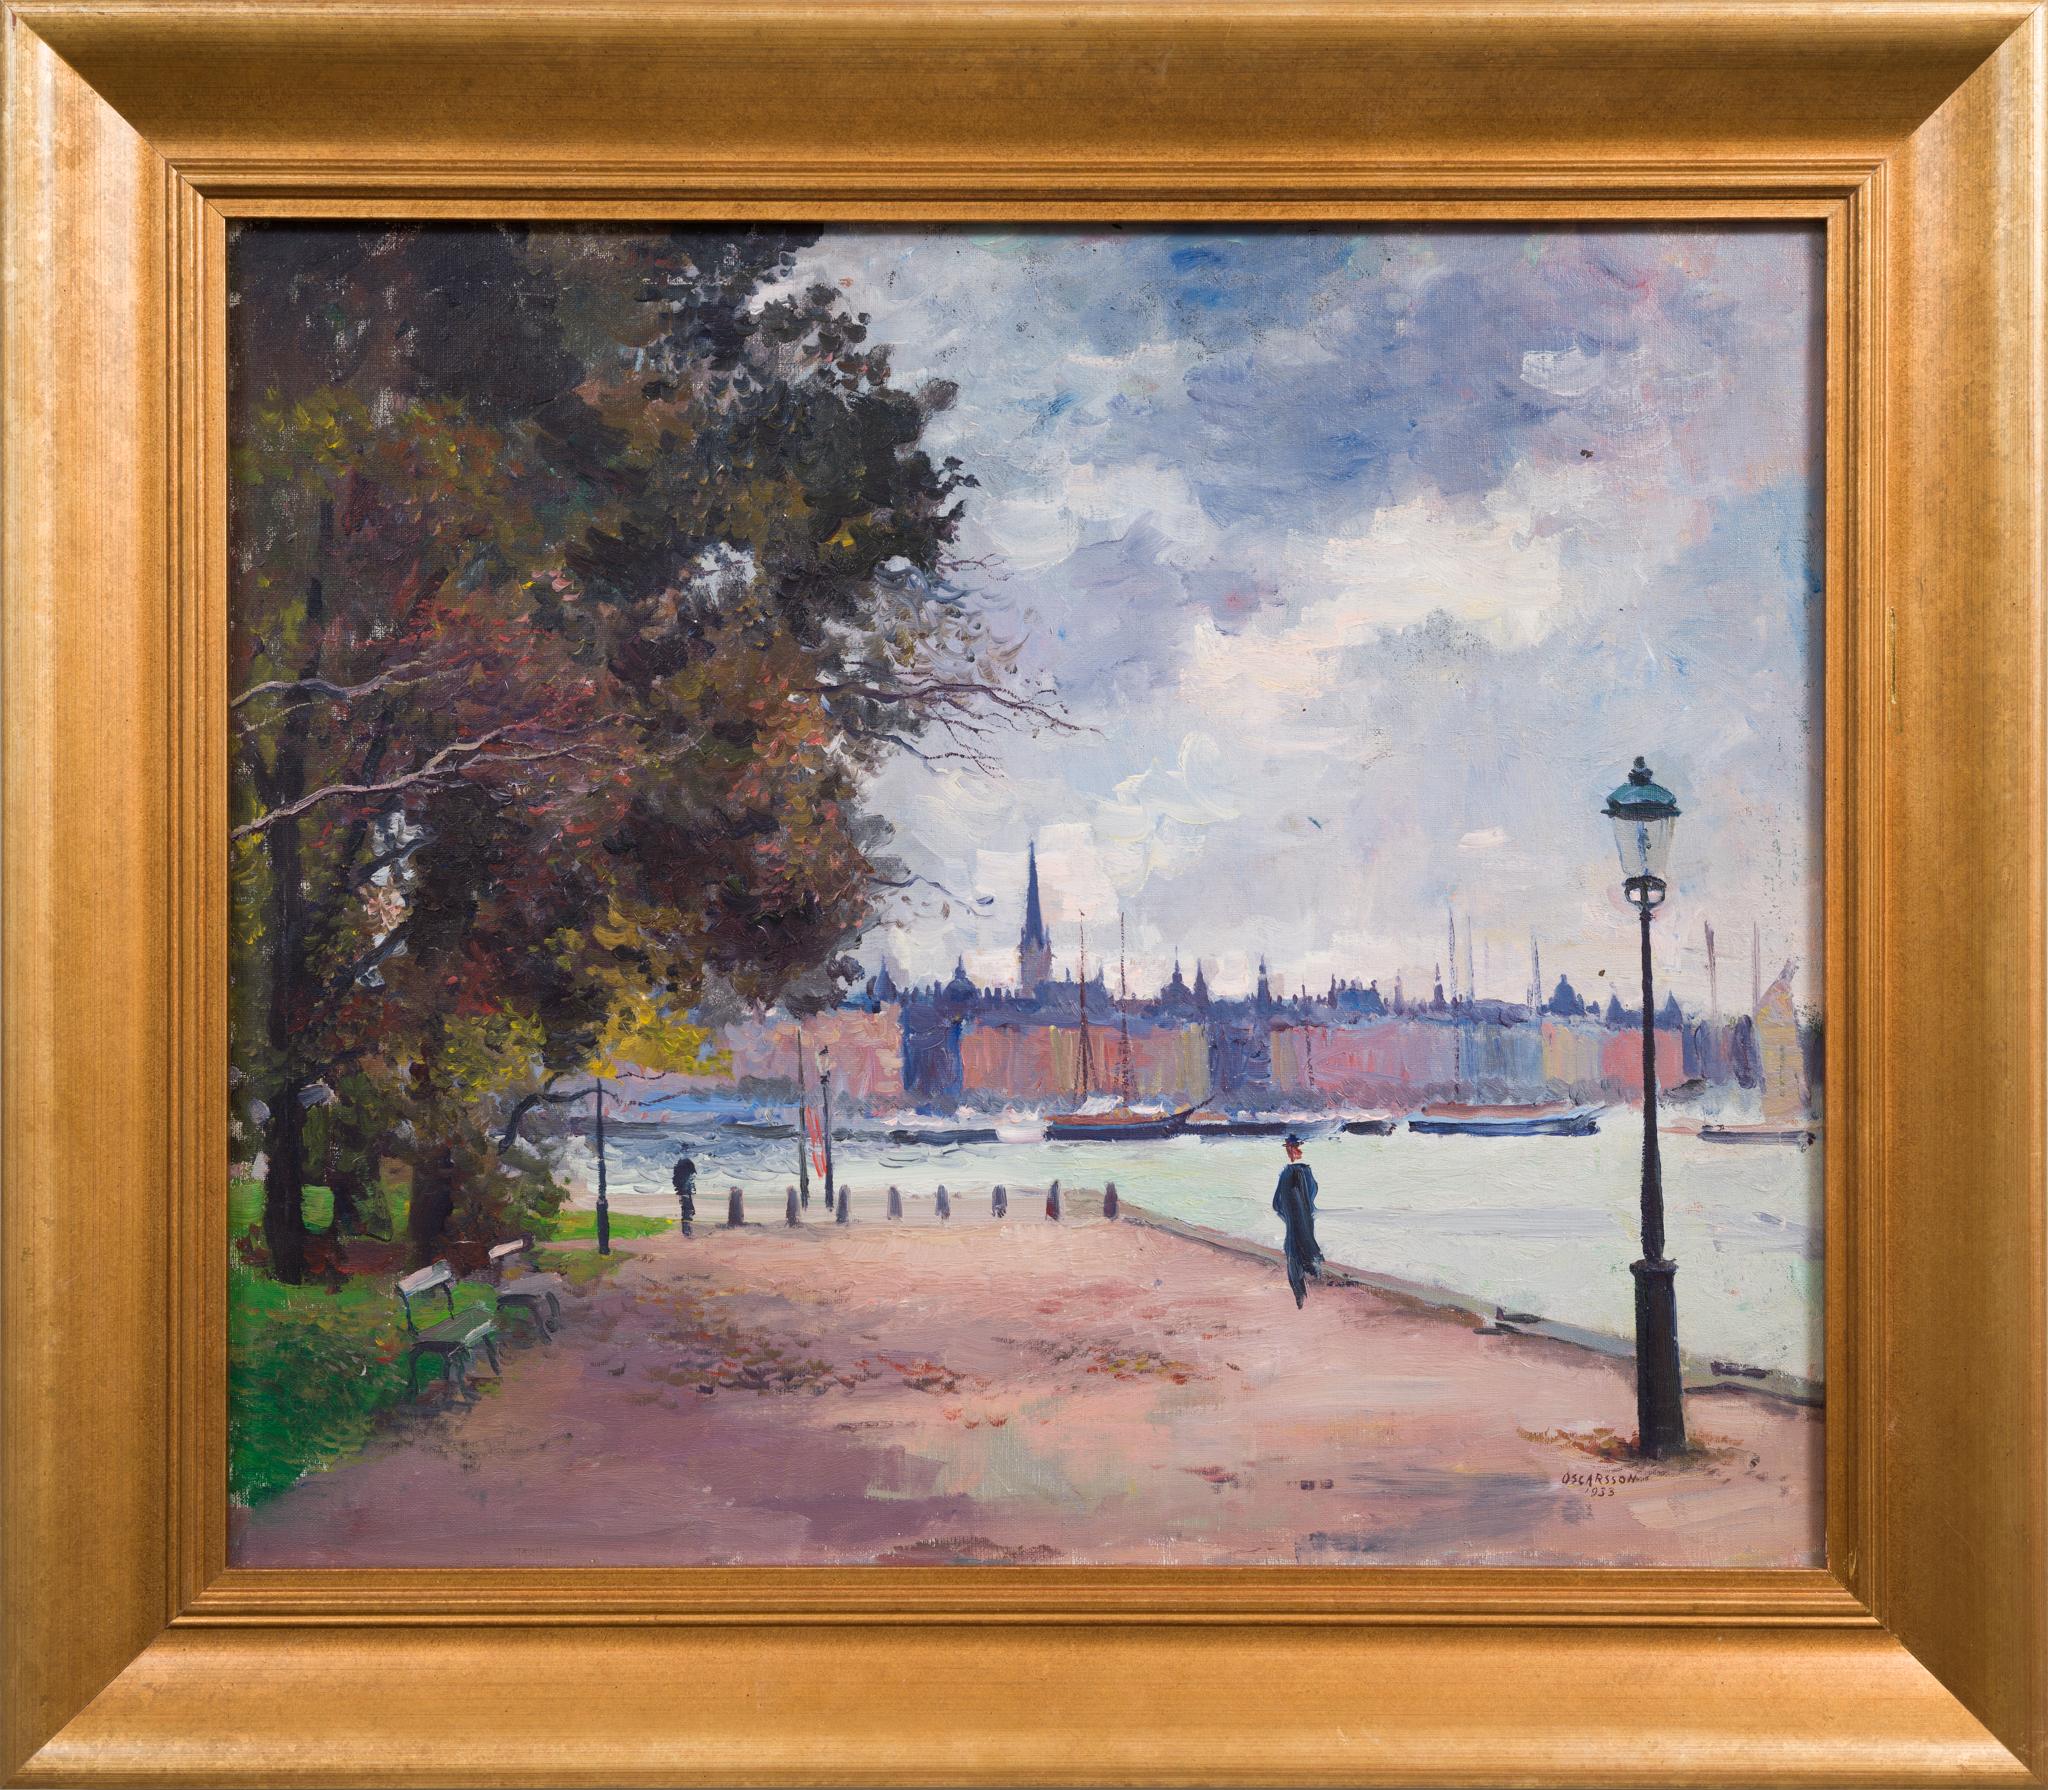 This painting by Bernhard Oscarsson (1894-1977) is a captivating visual narrative of Stockholm's serene beauty. Oscarsson, a student of Caleb Althin's painting school and the Royal Swedish Academy of Fine Arts in Stockholm, honed his craft